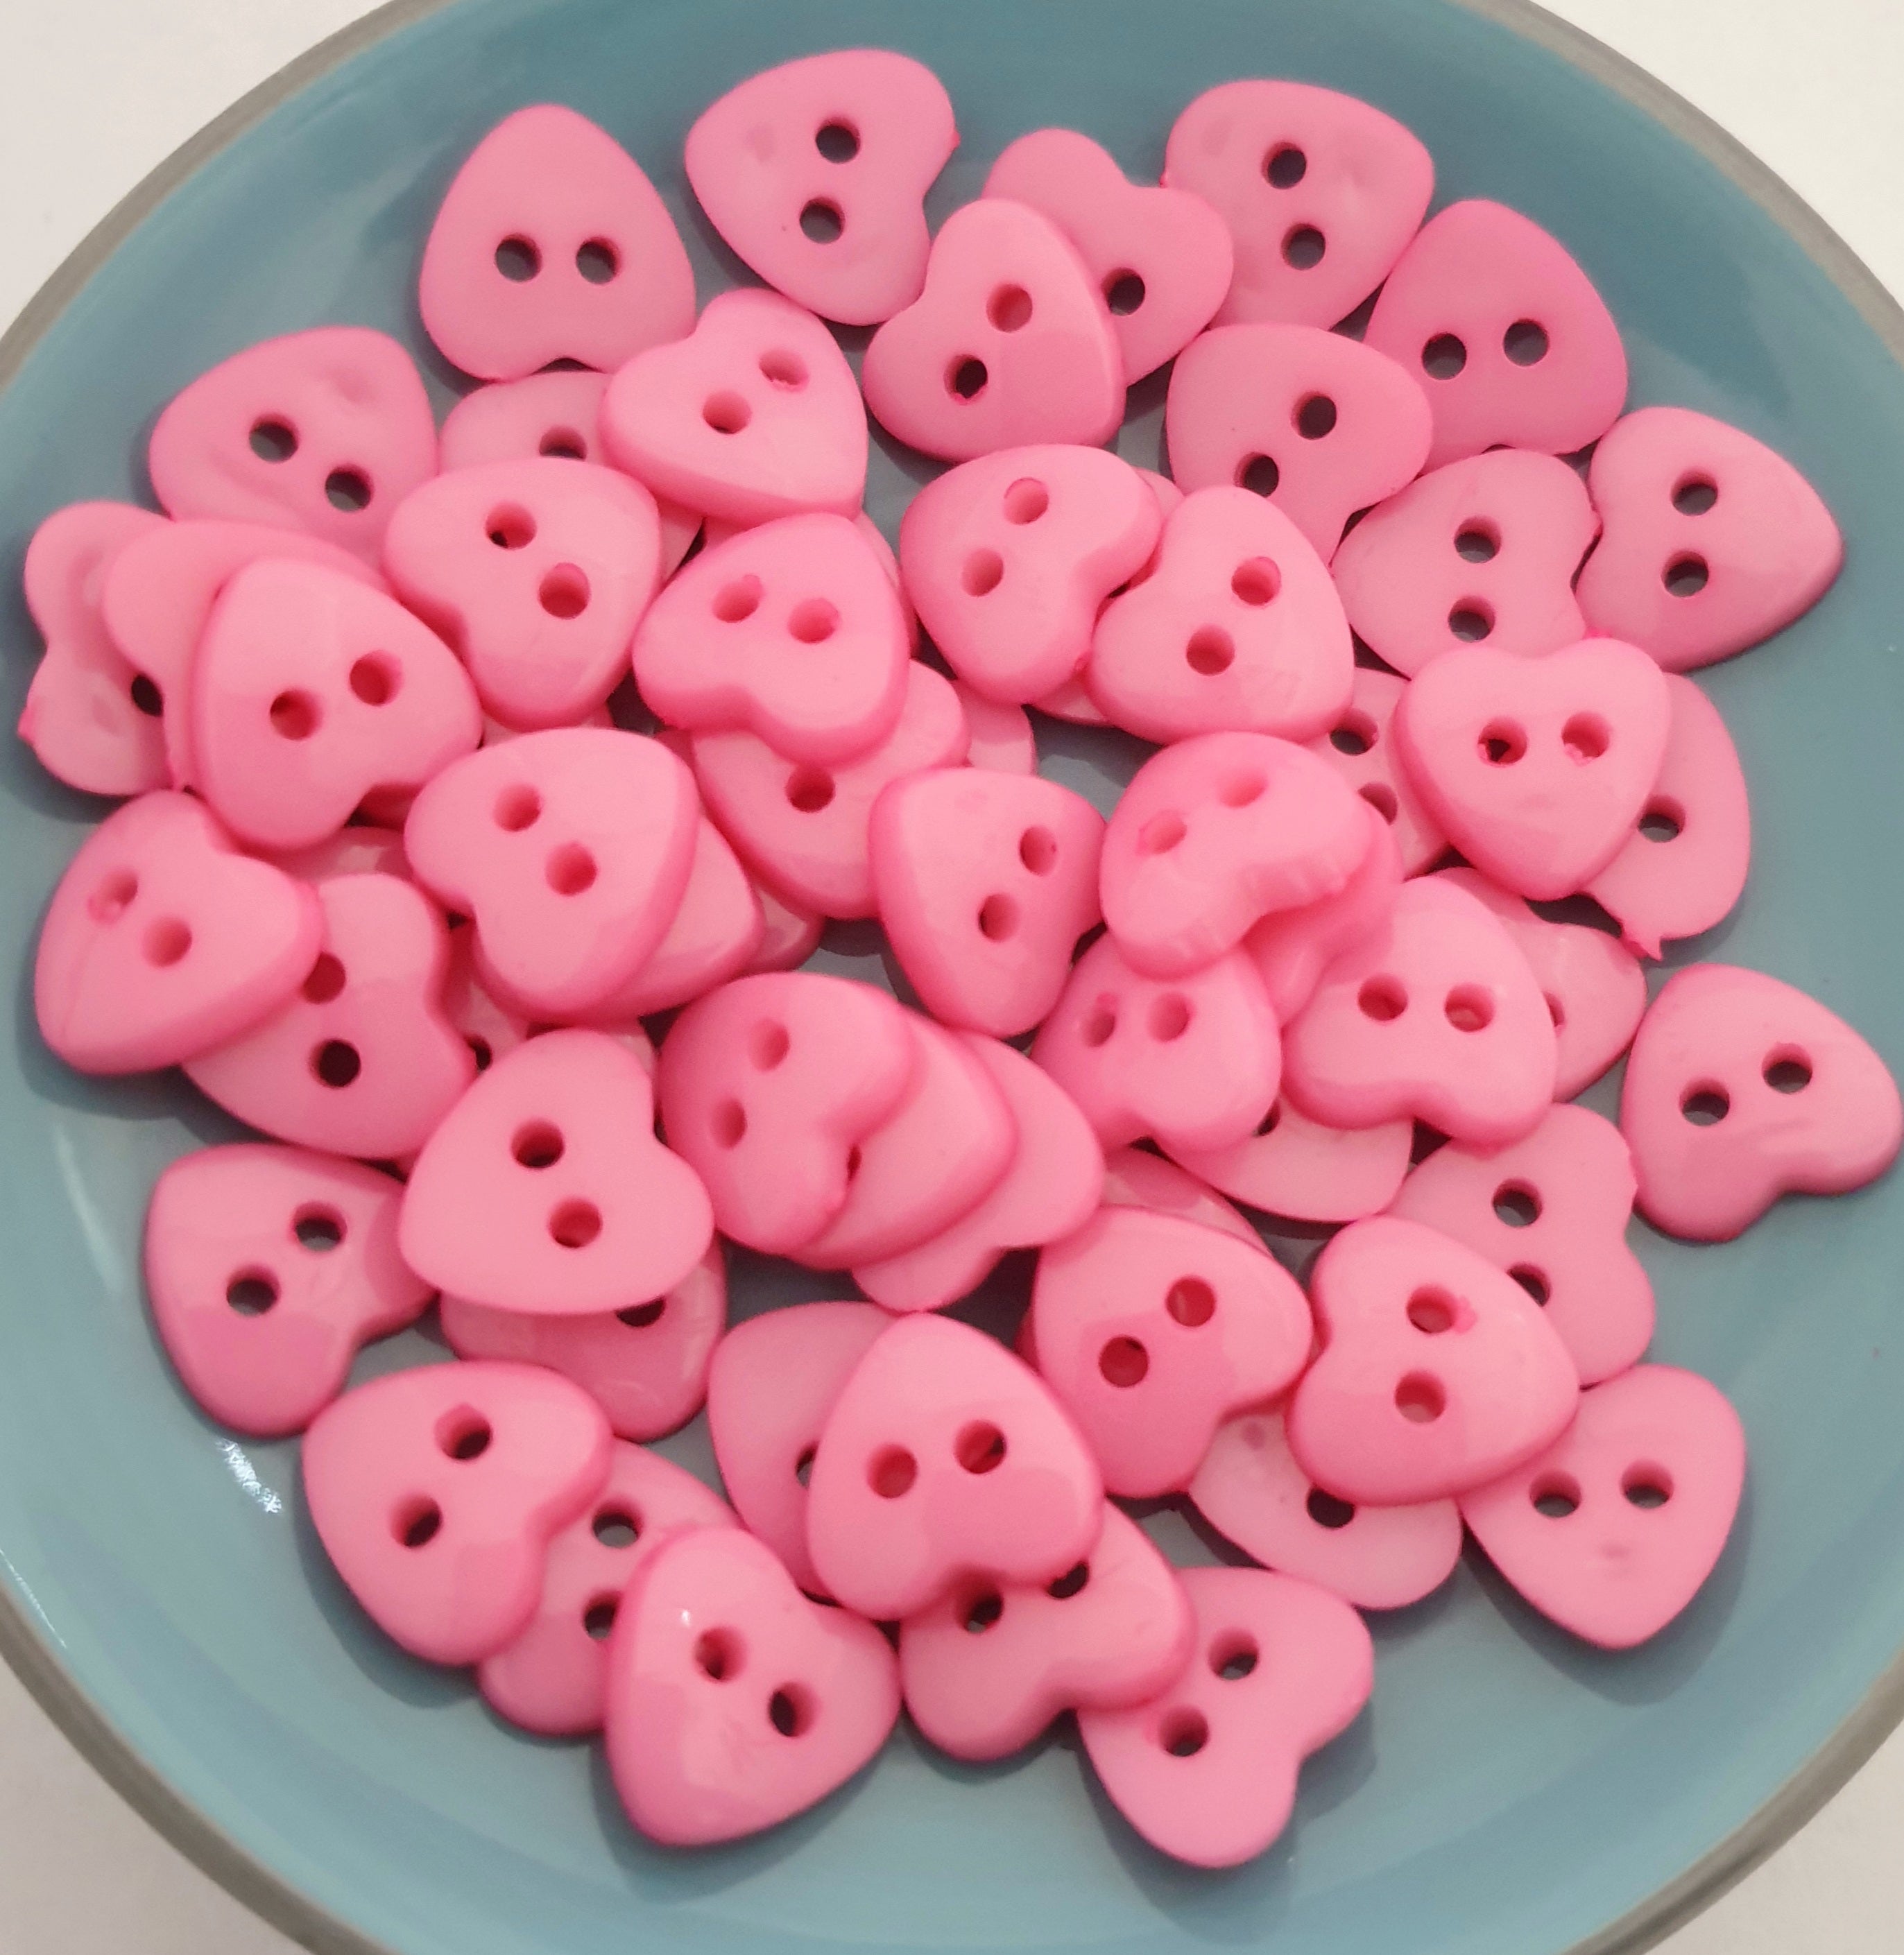 MajorCrafts 60pcs 13mm Bright Pink Heart Shaped 2 Holes Resin Sewing Buttons